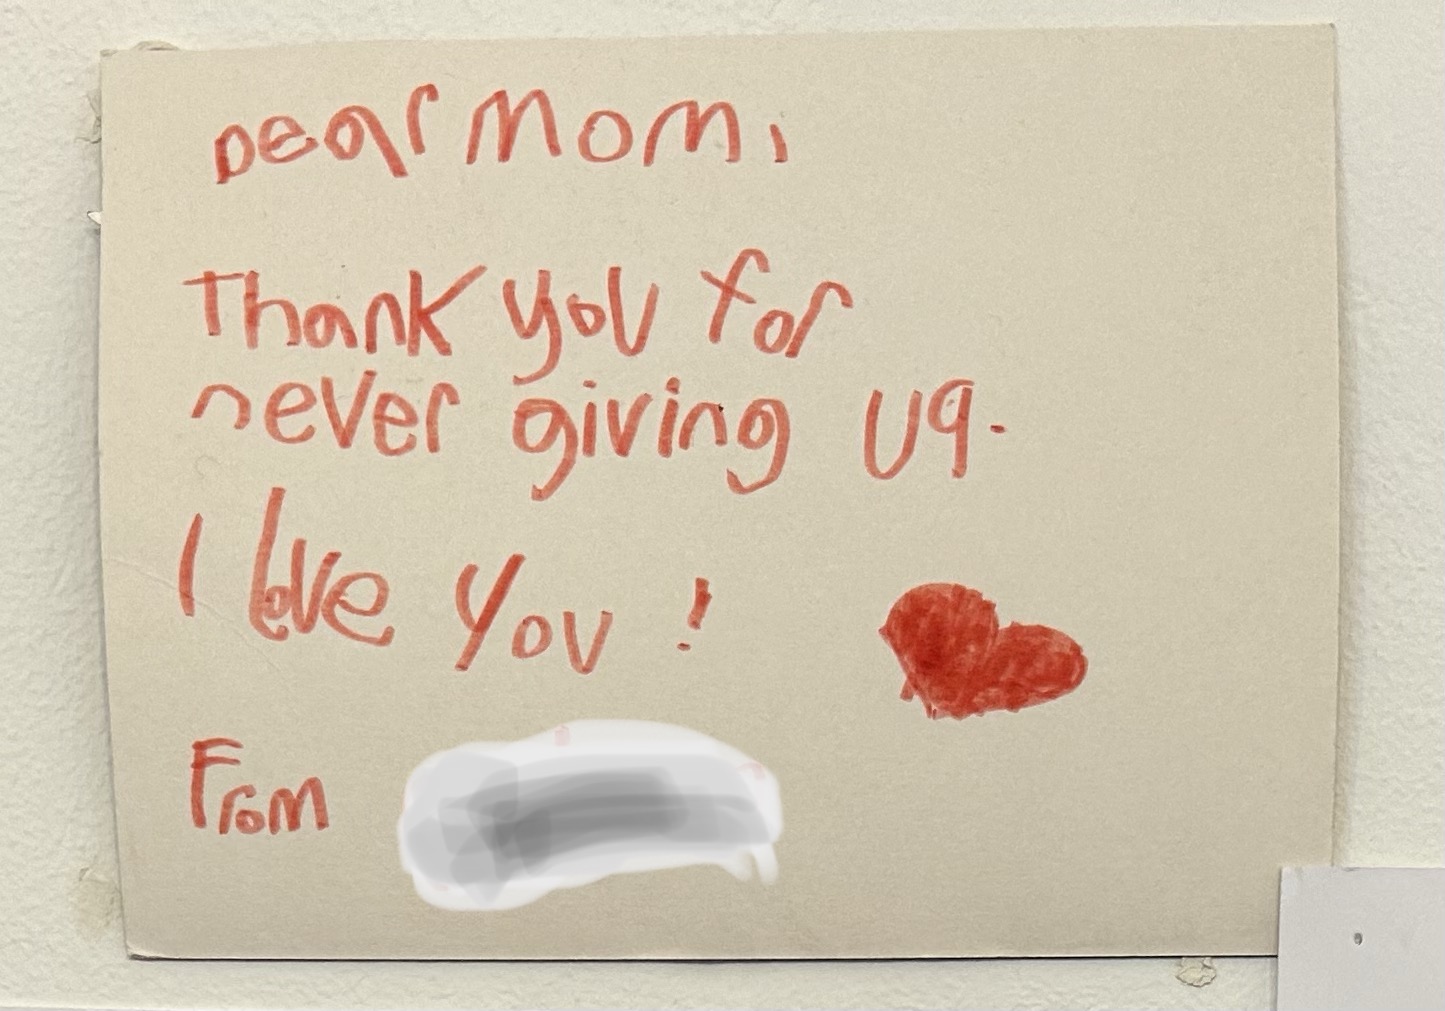 note from child in red ink on white paper reading: dear mom, thank you for never giving up, I love you. the p in up is written reversed, a typical mistake of children learning to write.